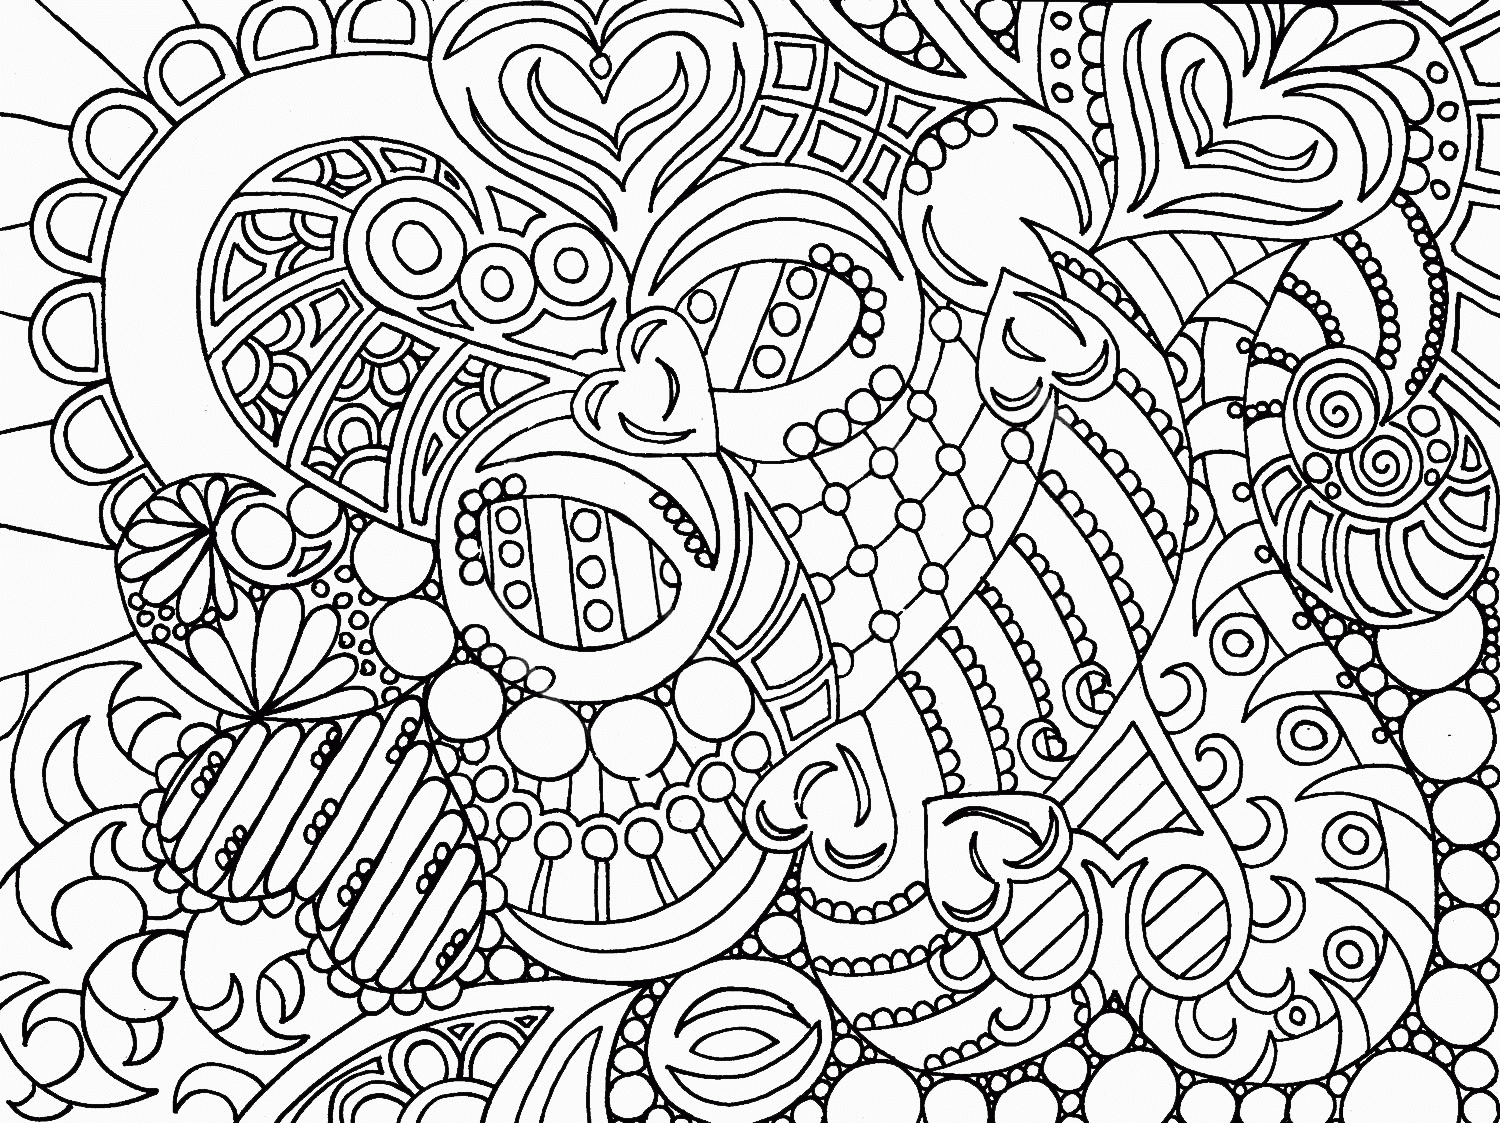 Abstract Girl Coloring Pages | Coloring Pages For All Ages